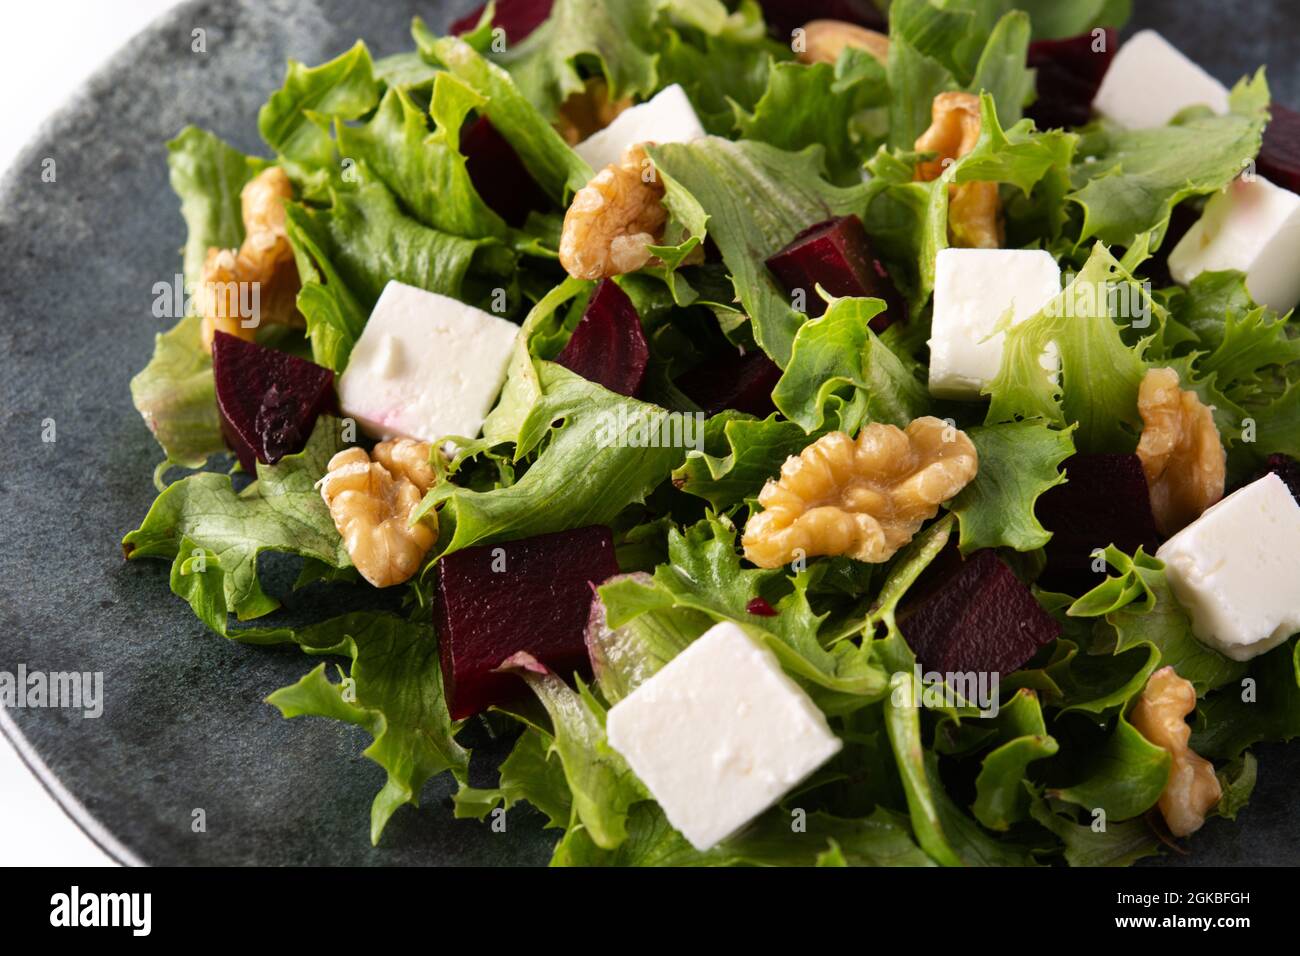 Beetroot salad with feta cheese,lettuce and walnuts isolated on white background Stock Photo